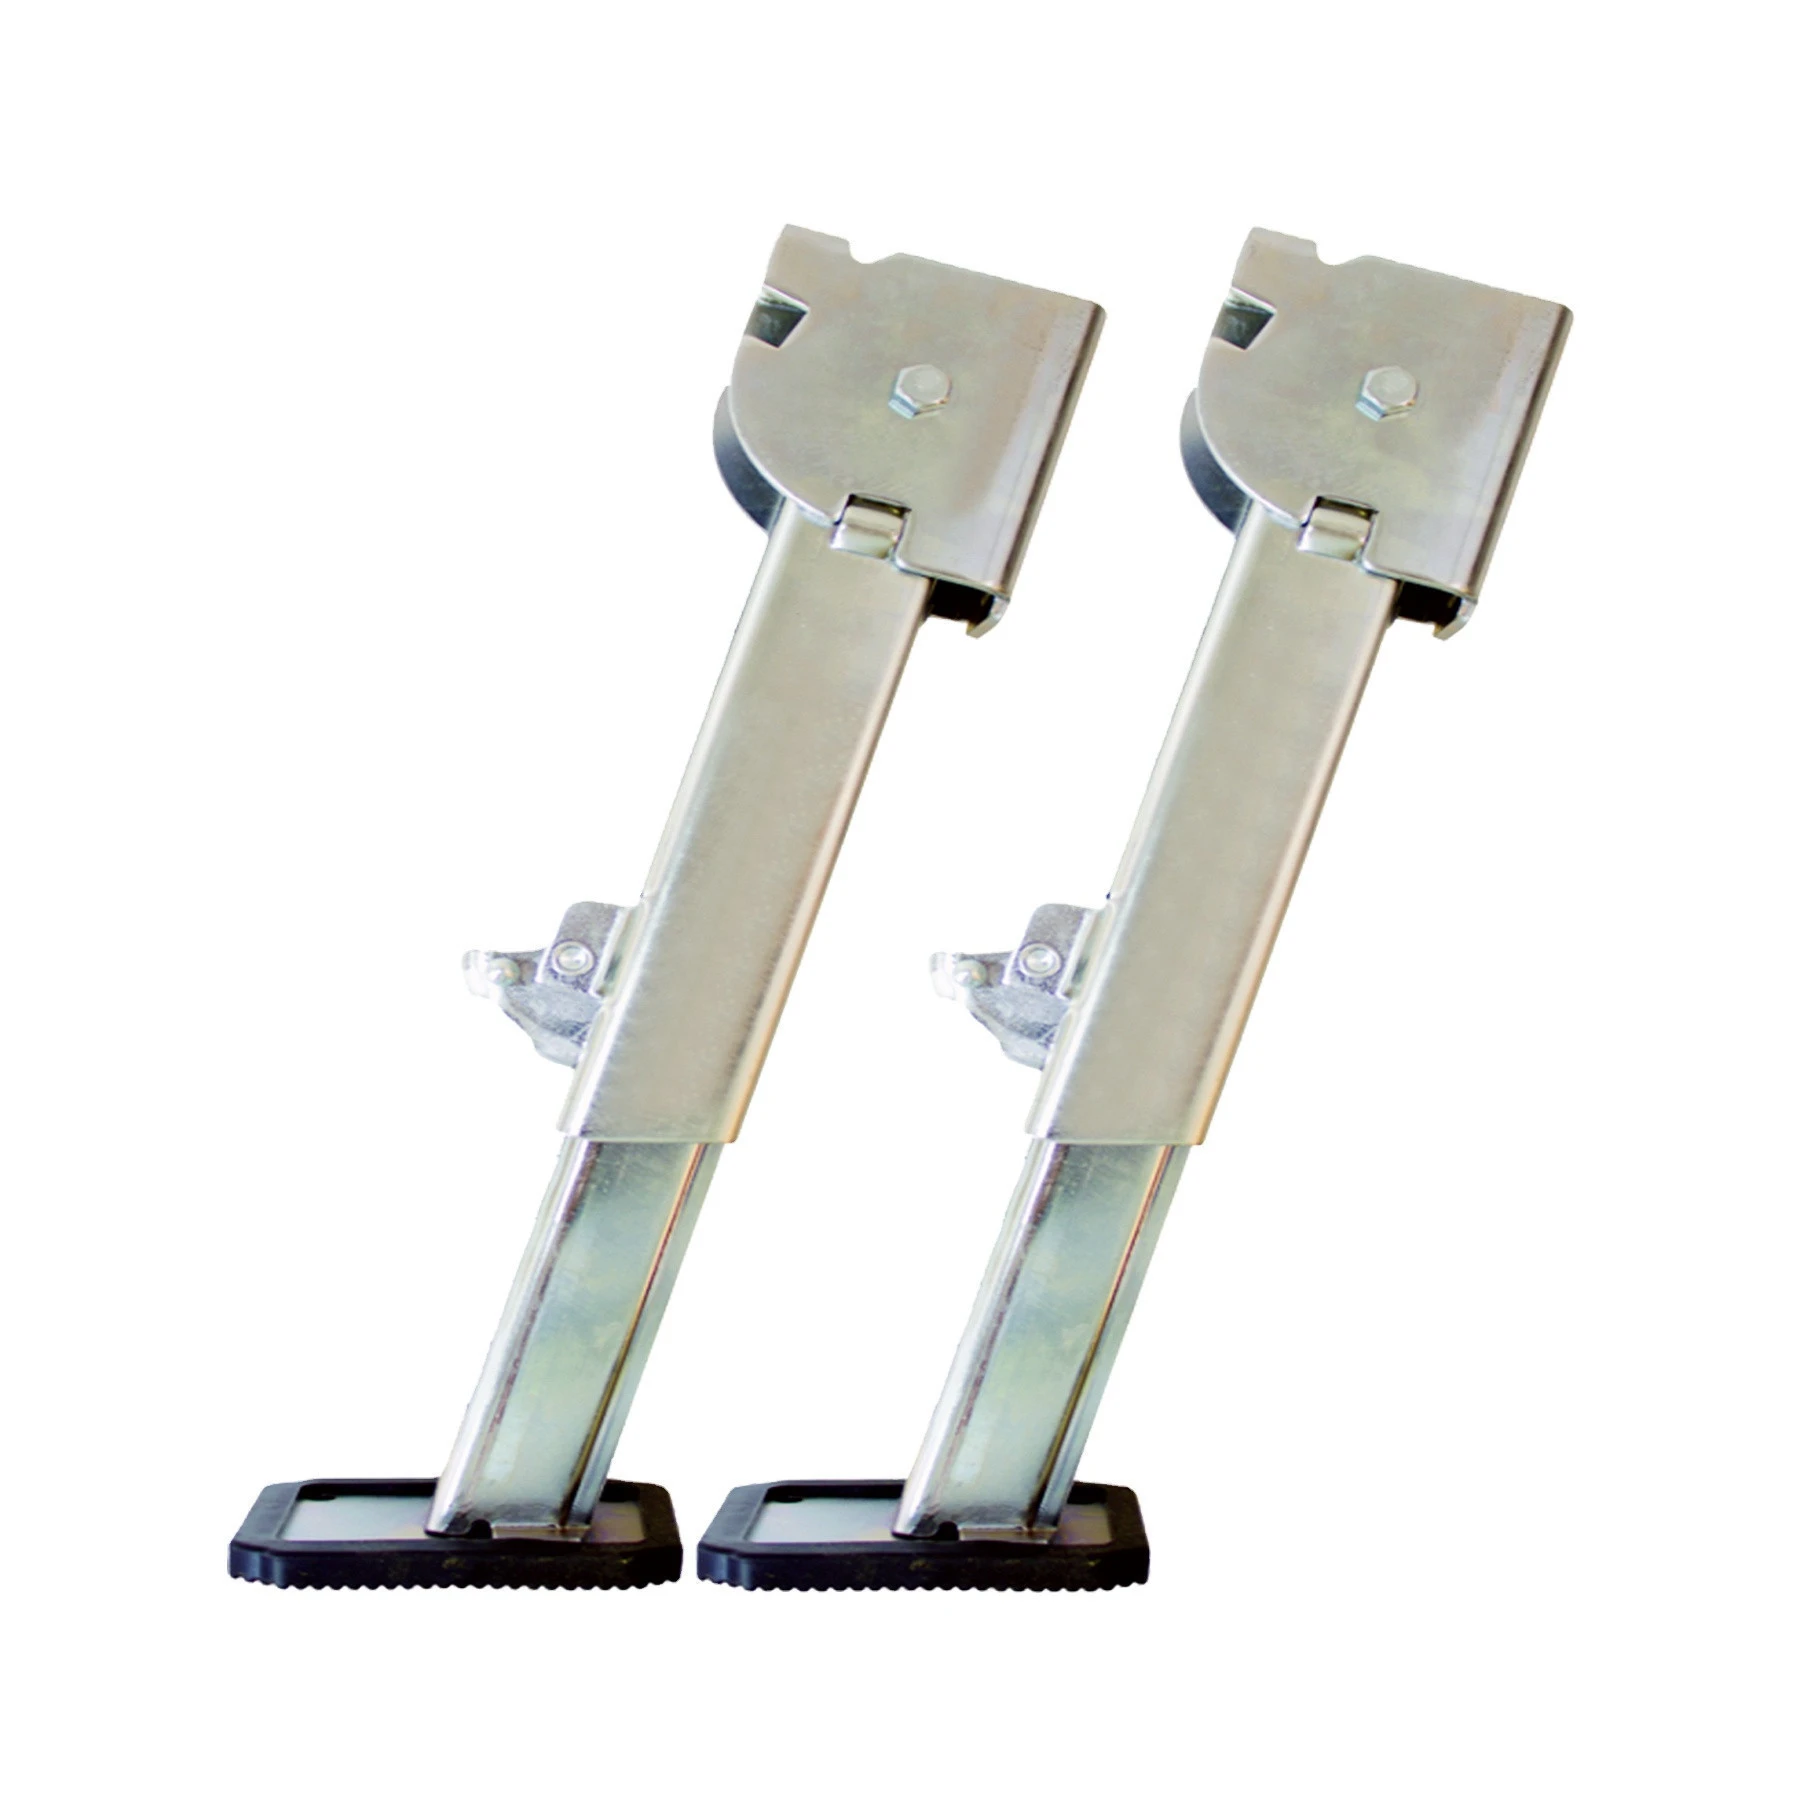 TOWKING 300 lbs Zinc plated Trailer Rear Support Jacks